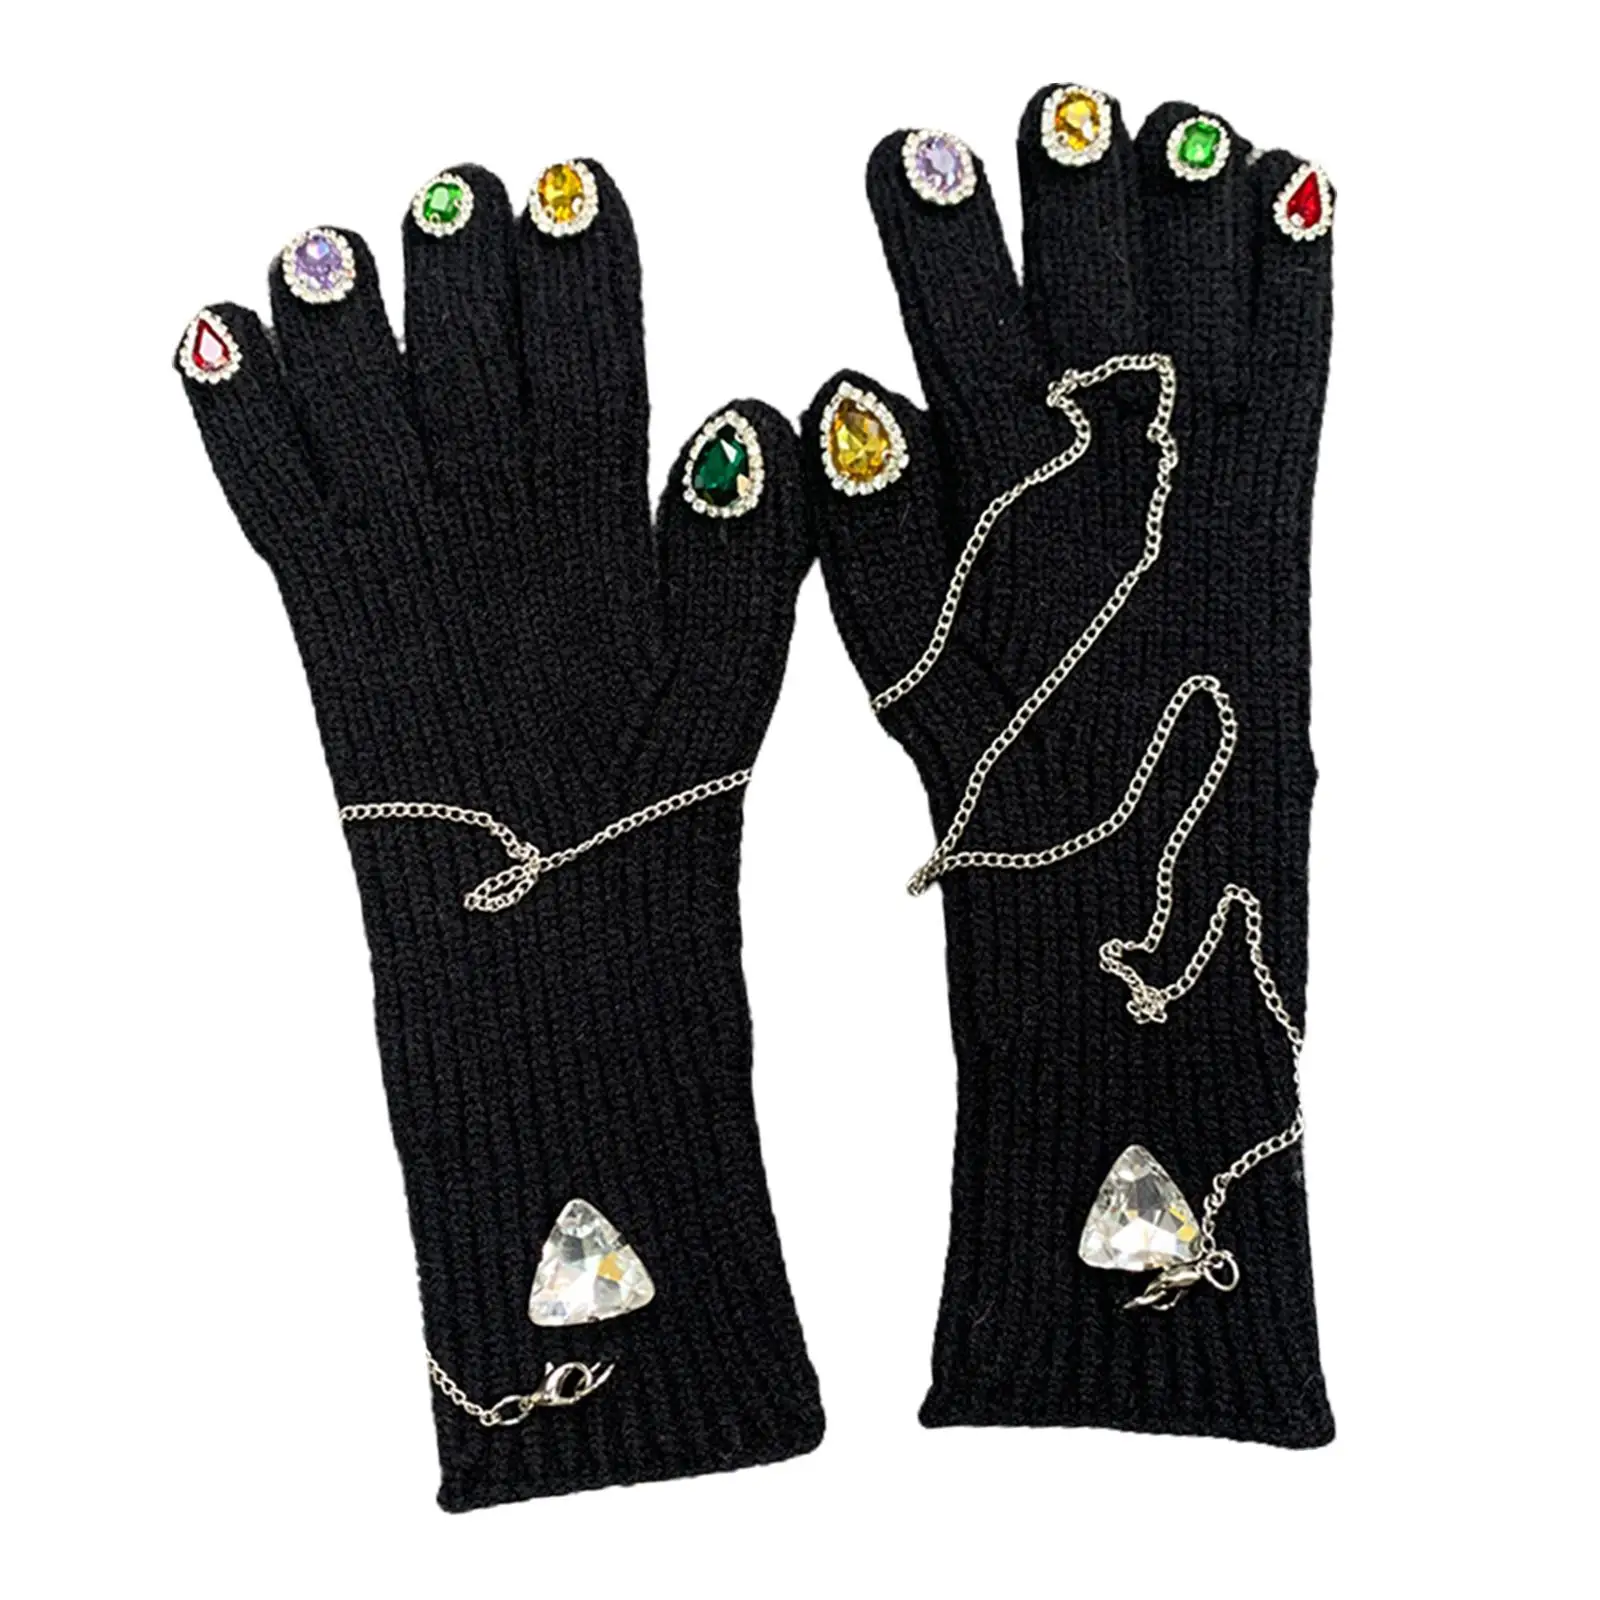 Women Winter Warm Gloves Cold Weather Gloves Long Wrist Knit Gloves for Running Cycling